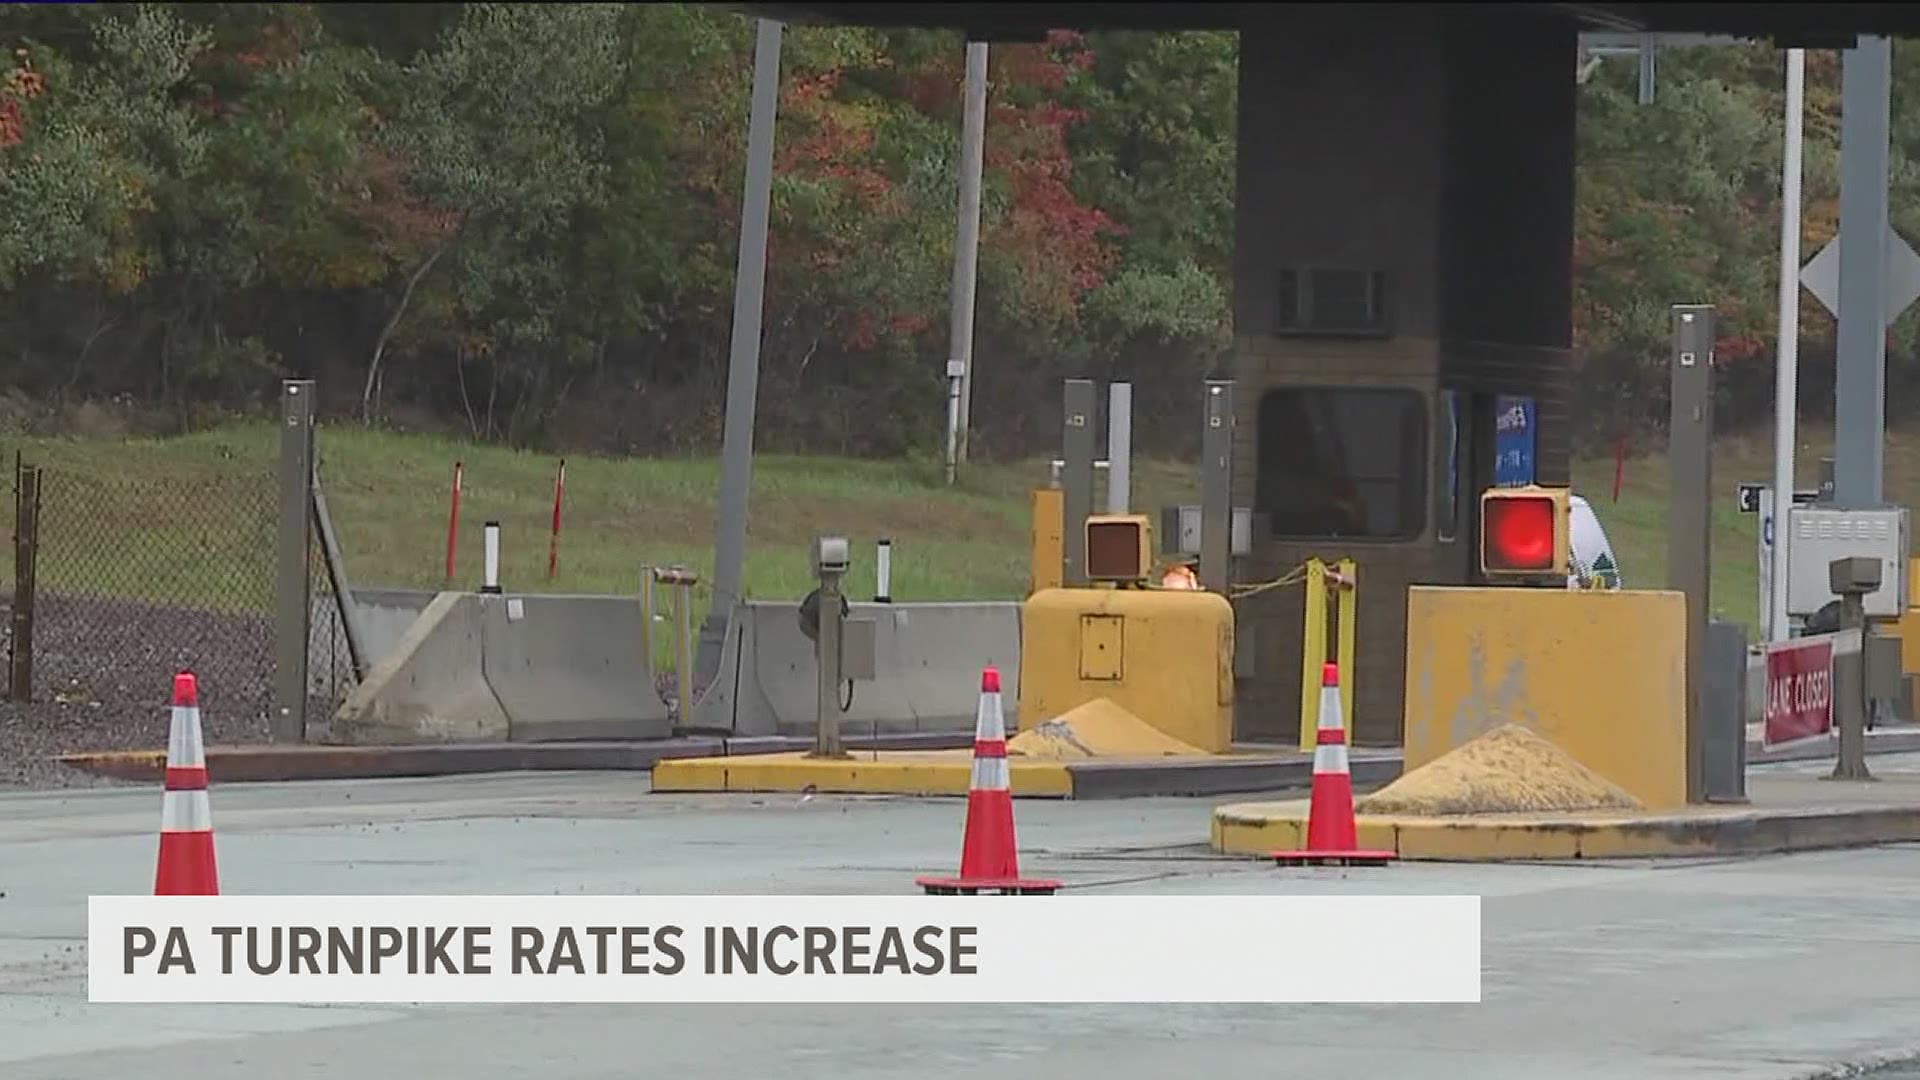 Rates increased 6 percent for all motorists using E-ZPass, plus an additional 45 percent increase for vehicles using toll by plate.